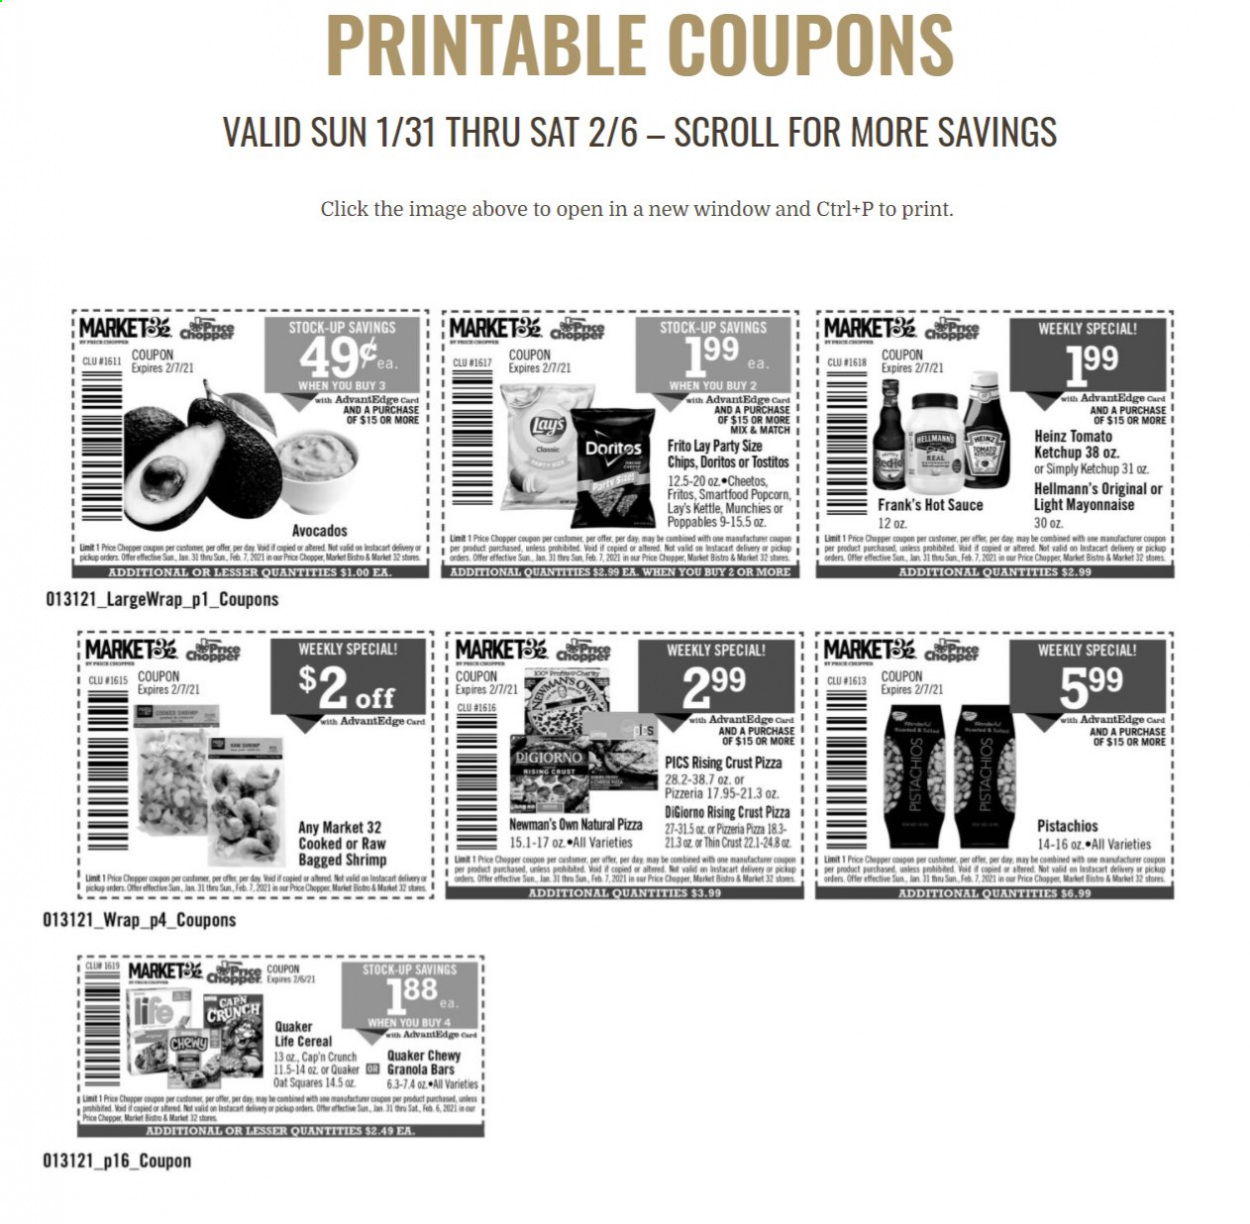 thumbnail - Price Chopper Flyer - Sales products - shrimps, sauce, Quaker, curd, mayonnaise, Hellmann’s, Doritos, chips, Lay’s, Smartfood, popcorn, Tostitos, oats, Heinz, cereals, Fritos, granola bar, Cap'n Crunch, hot sauce, ketchup, pistachios. Page 1.